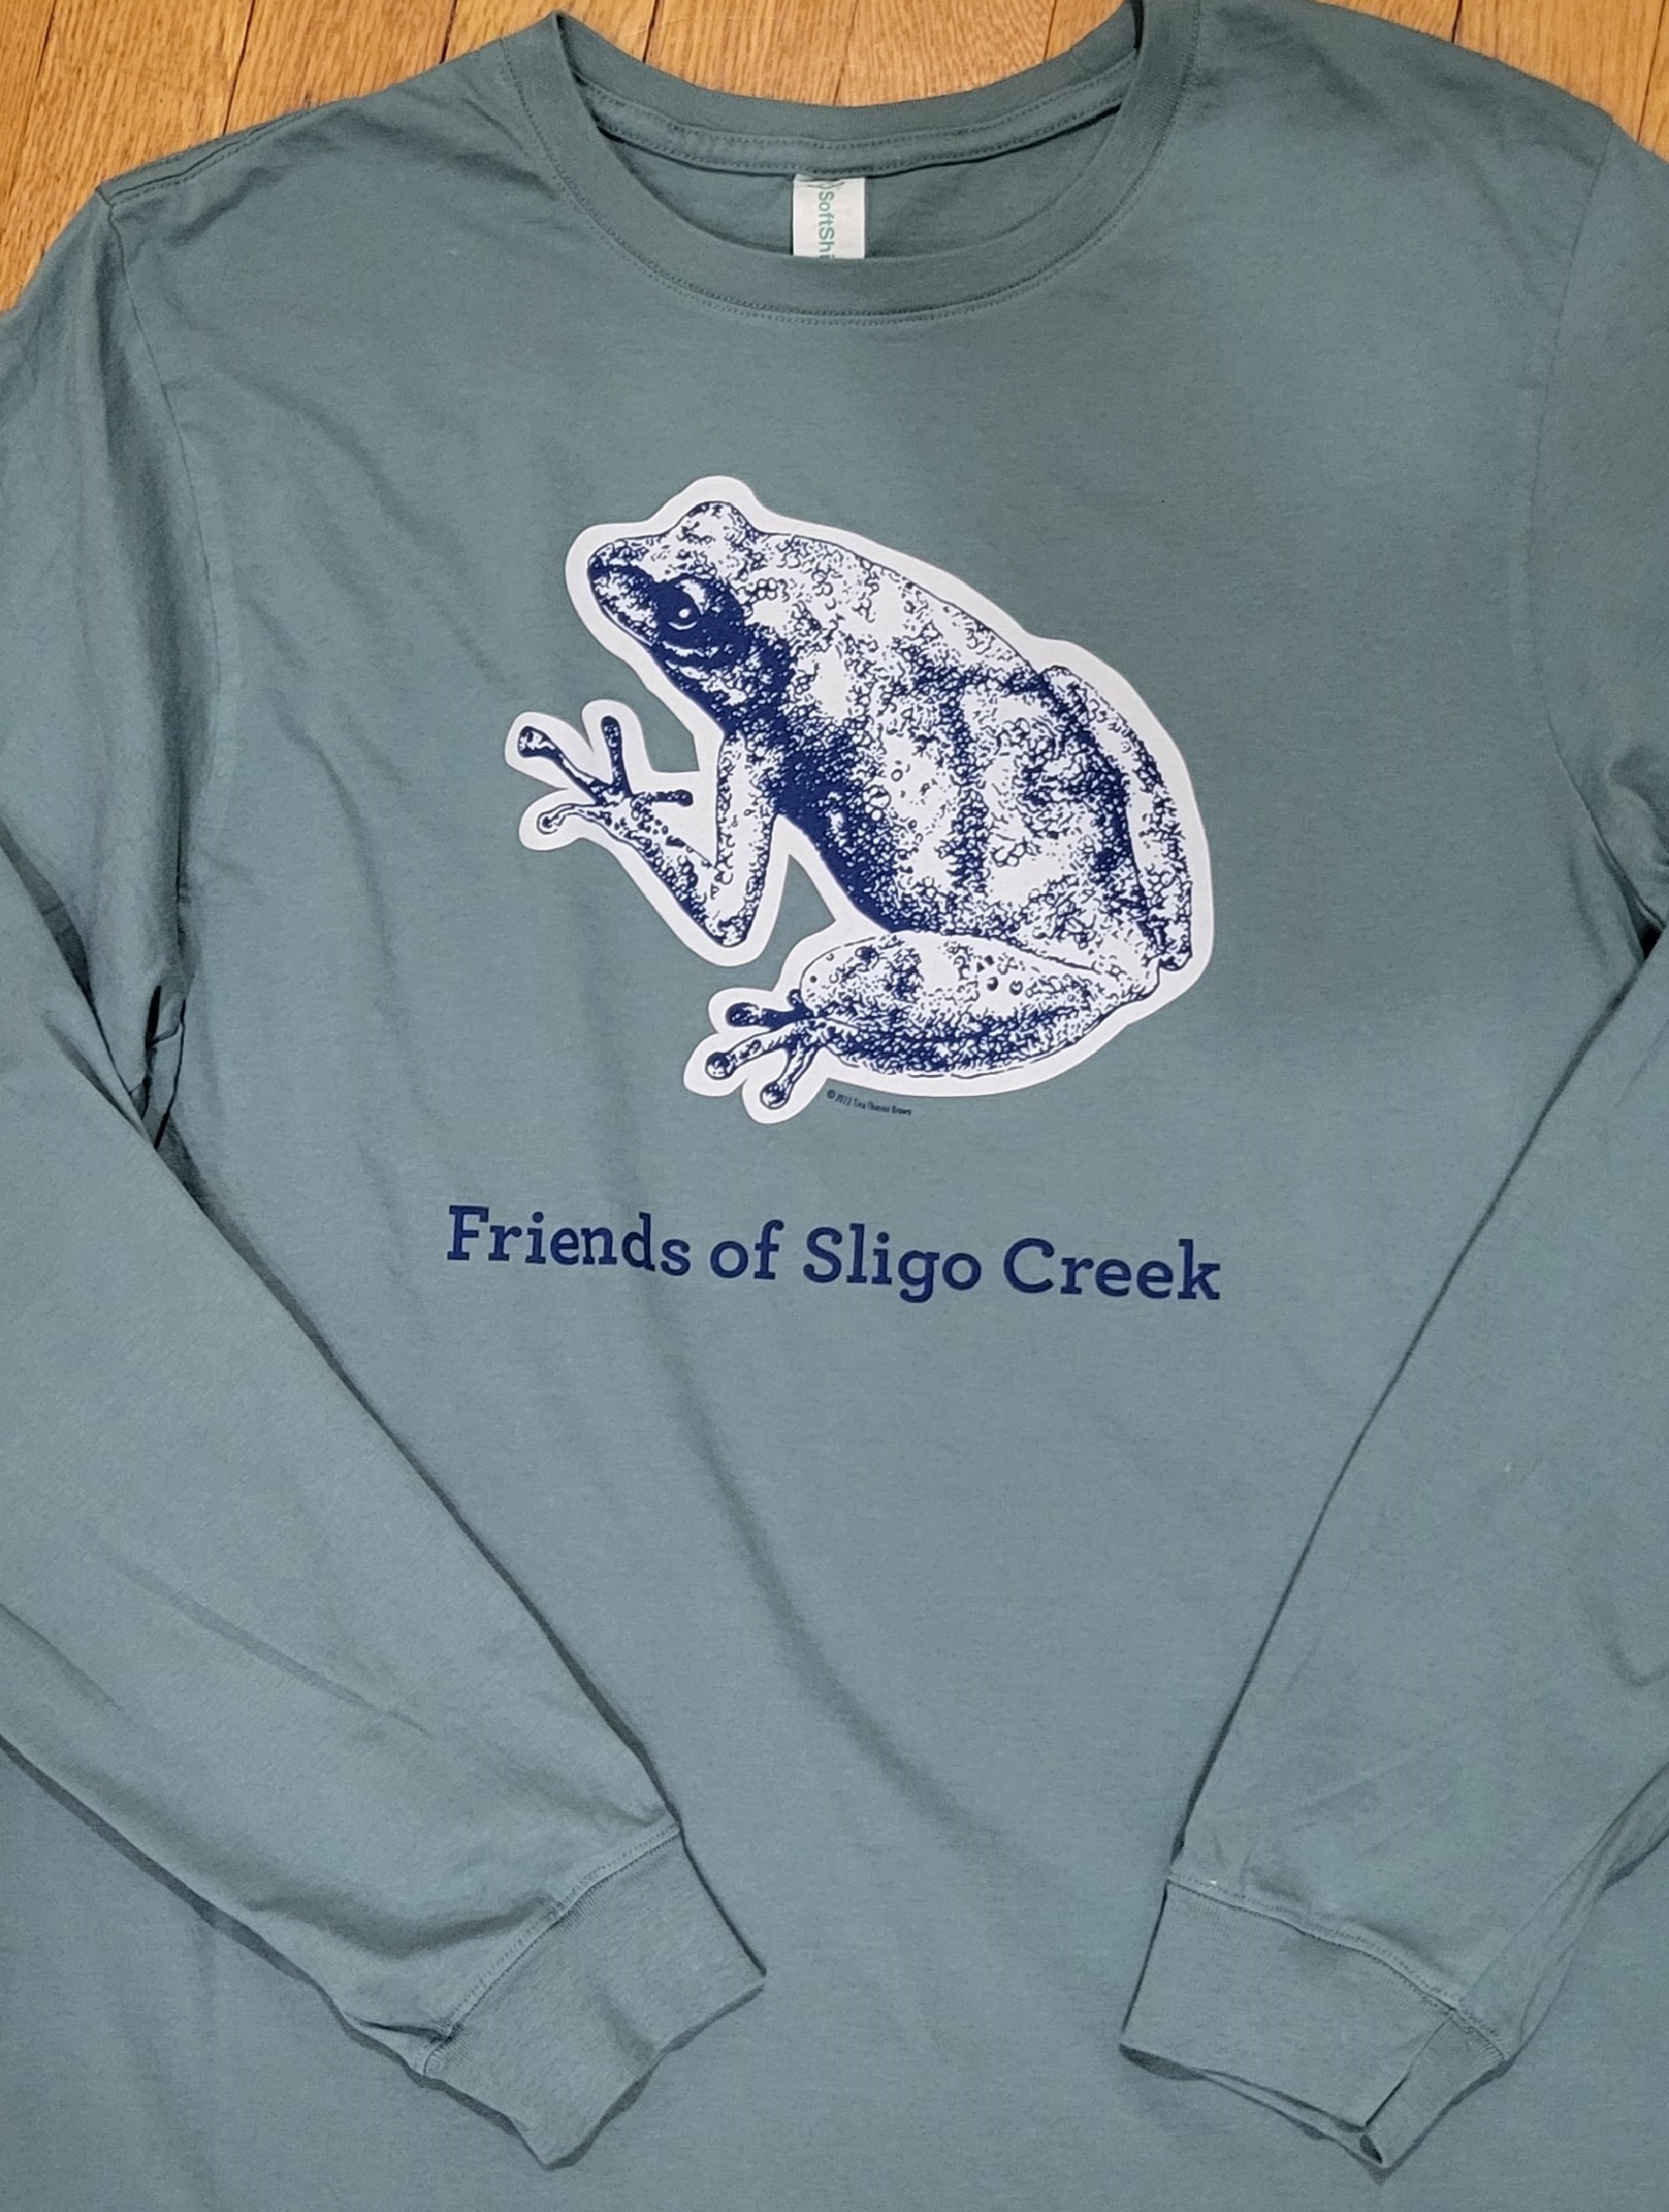 The FOSC long sleeved t-shirt in pine green with a drawing of a frog on the front.